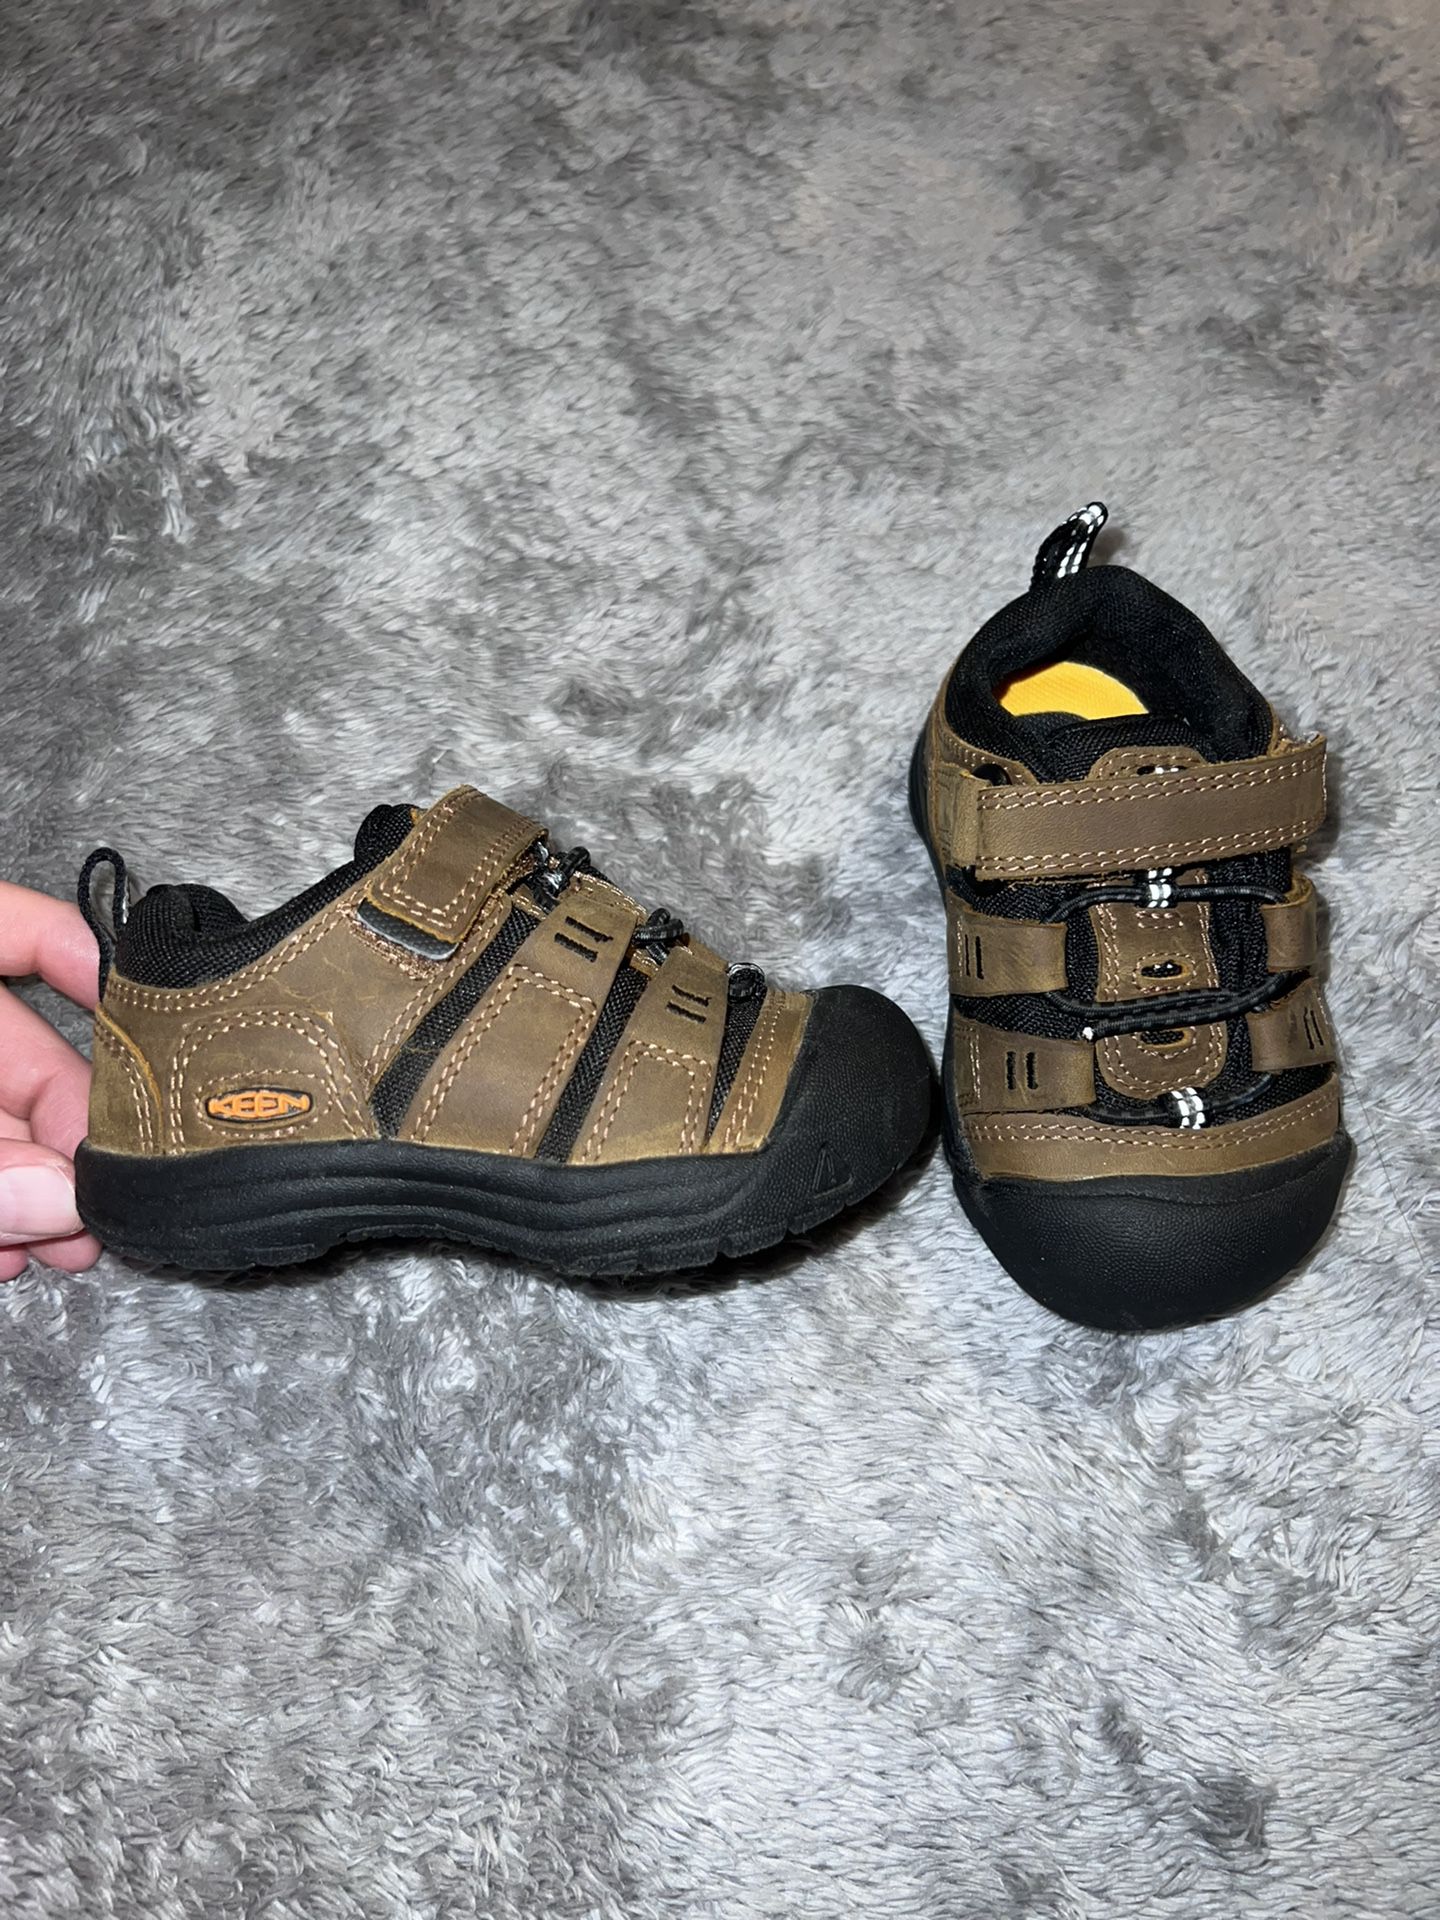 Keen Toddler Outdoor Shoes